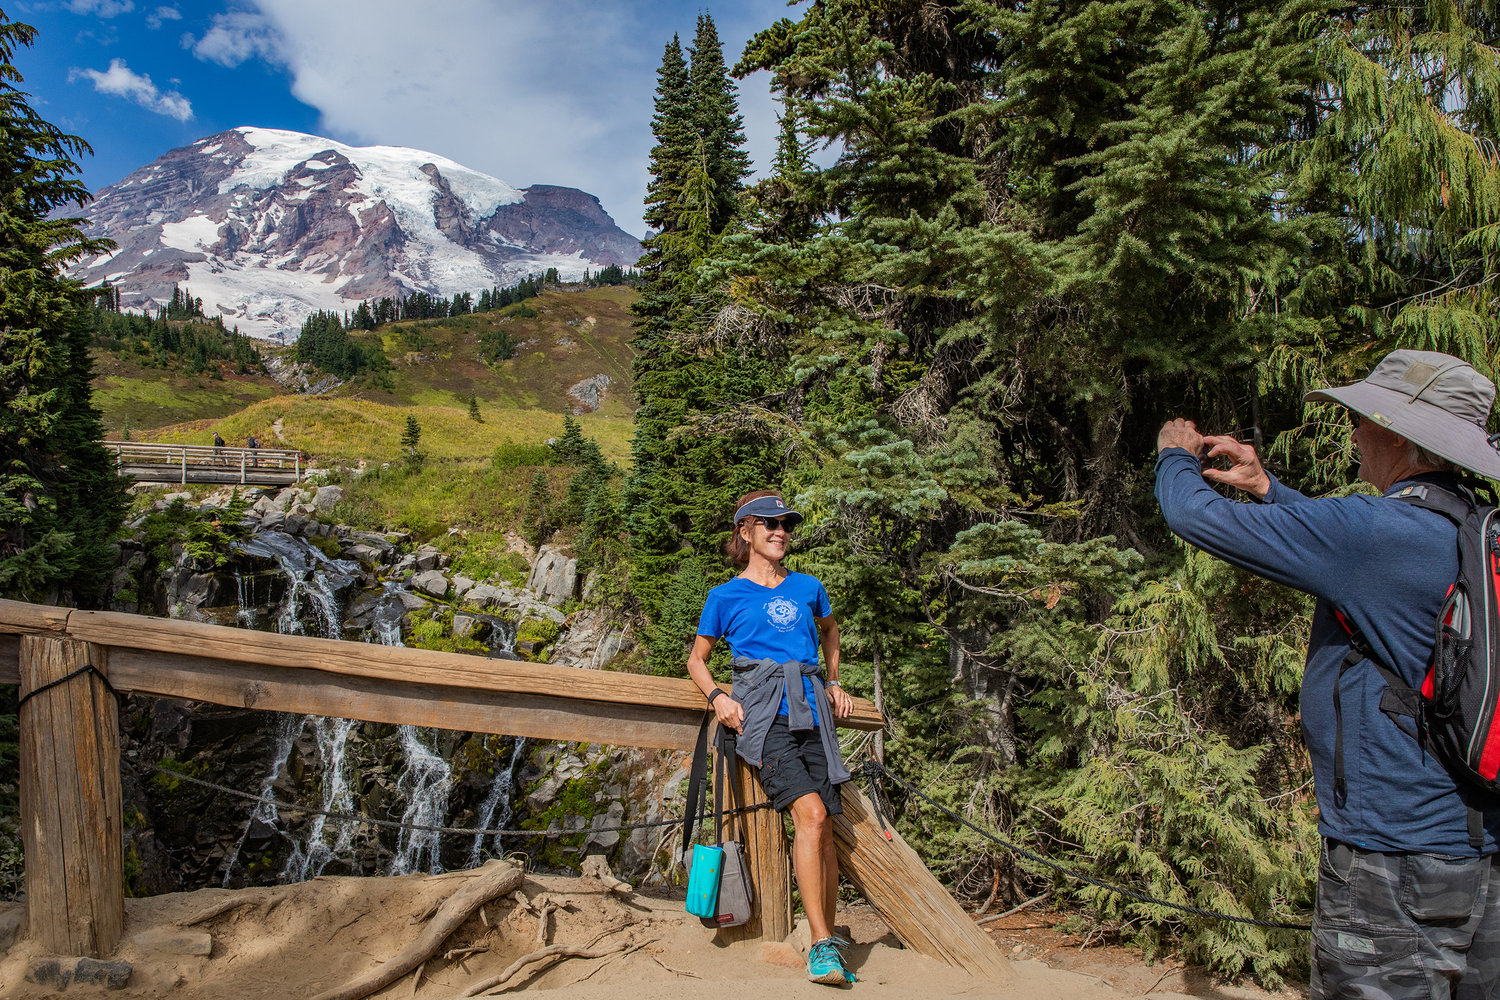 Visitors pose and take photos in front of Myrtle Falls as Mount Rainier sets the backdrop on Wednesday near Ashford.